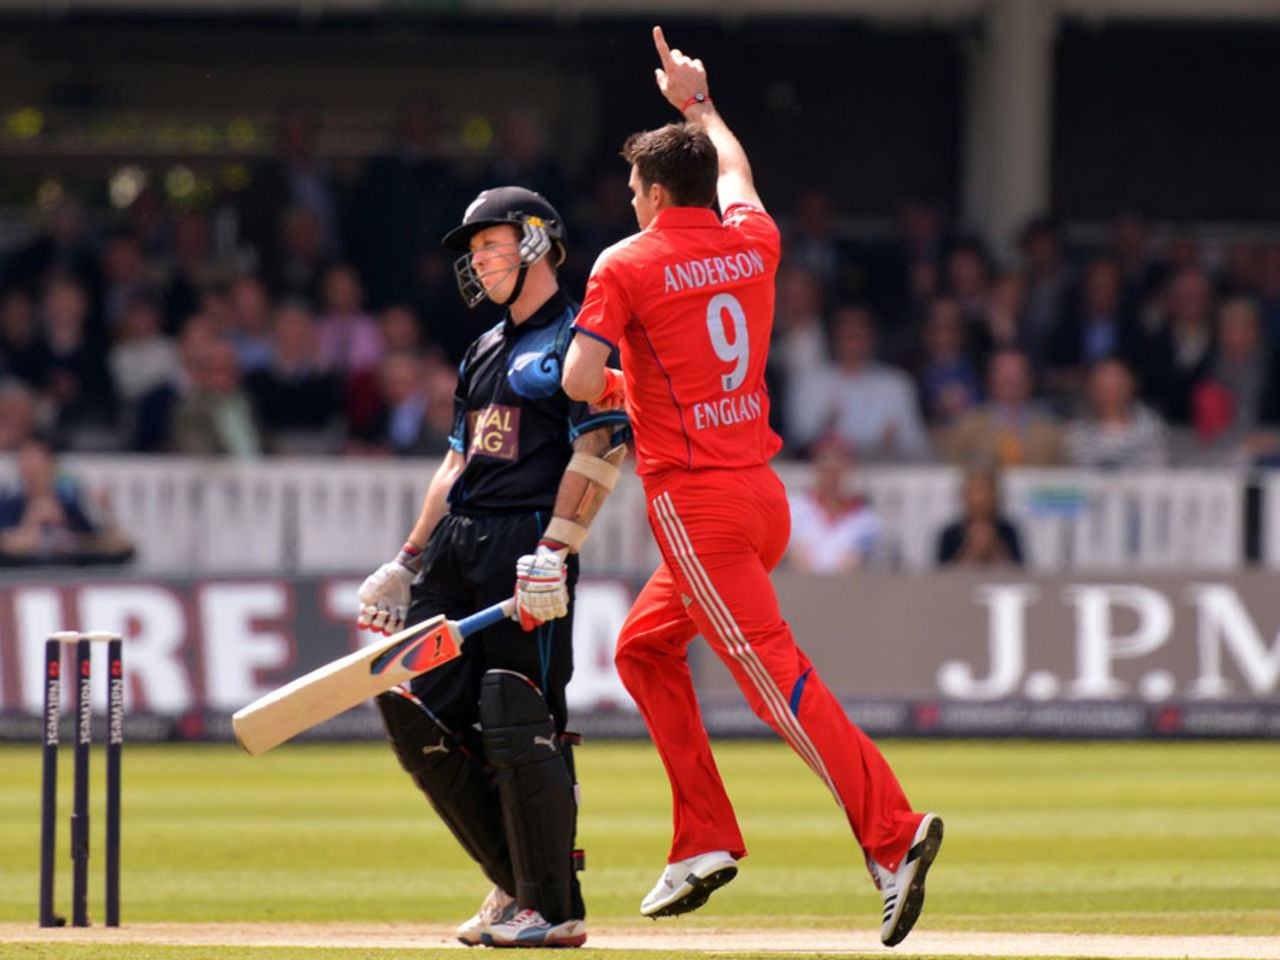 James Anderson removed Luke Ronchi for a duck, England v New Zealand, 1st ODI, Lord's, May 31, 2013